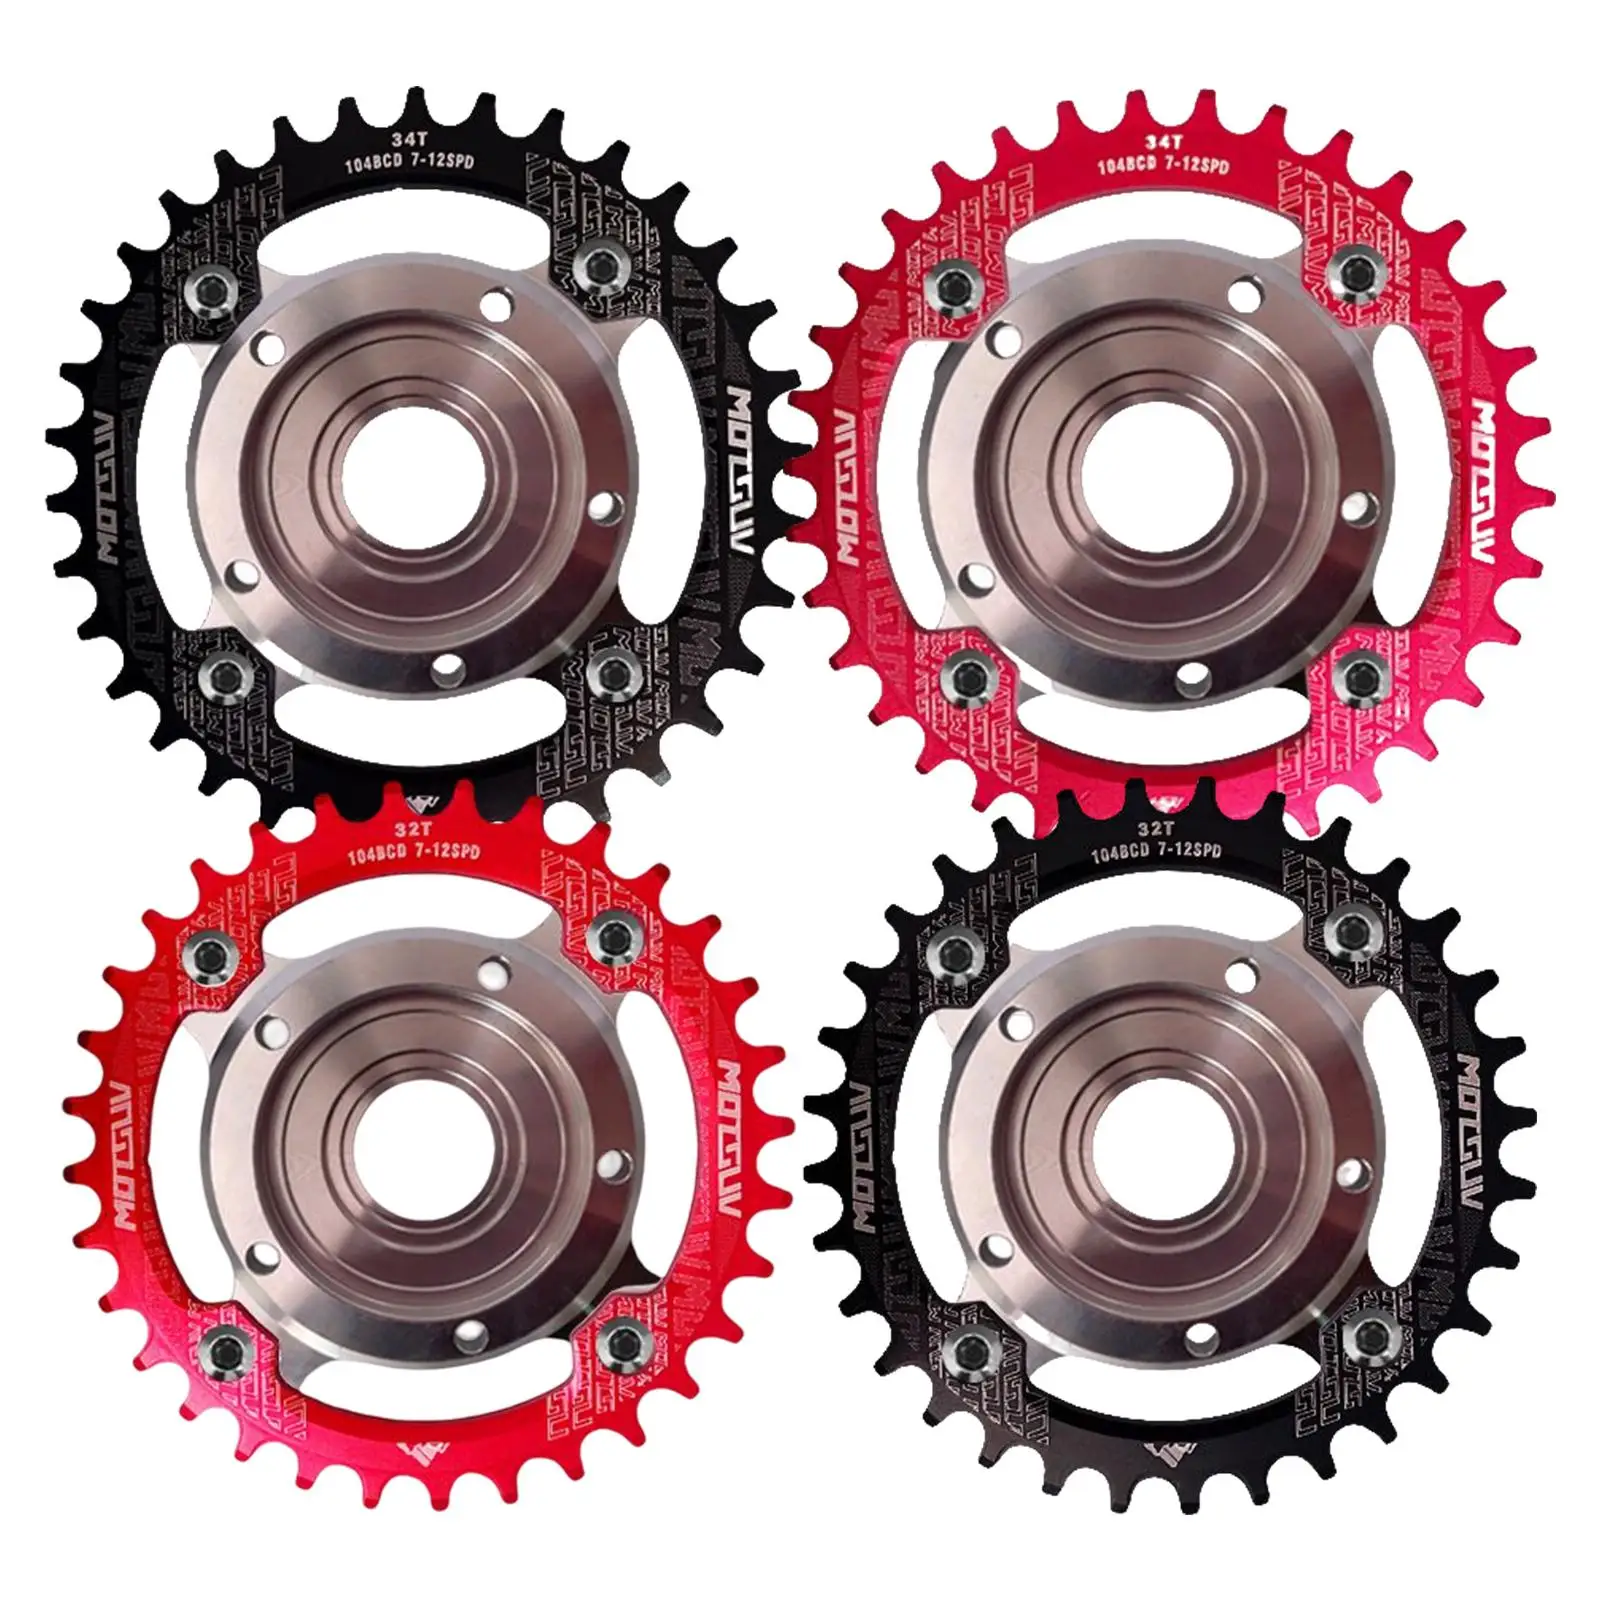 Chain Ring BCD104mm Mid Drive Motor Conversion Kit Accessory Wheel Engine Chainwheel for Road Bicycle MTB Bike Cycling E-Bike